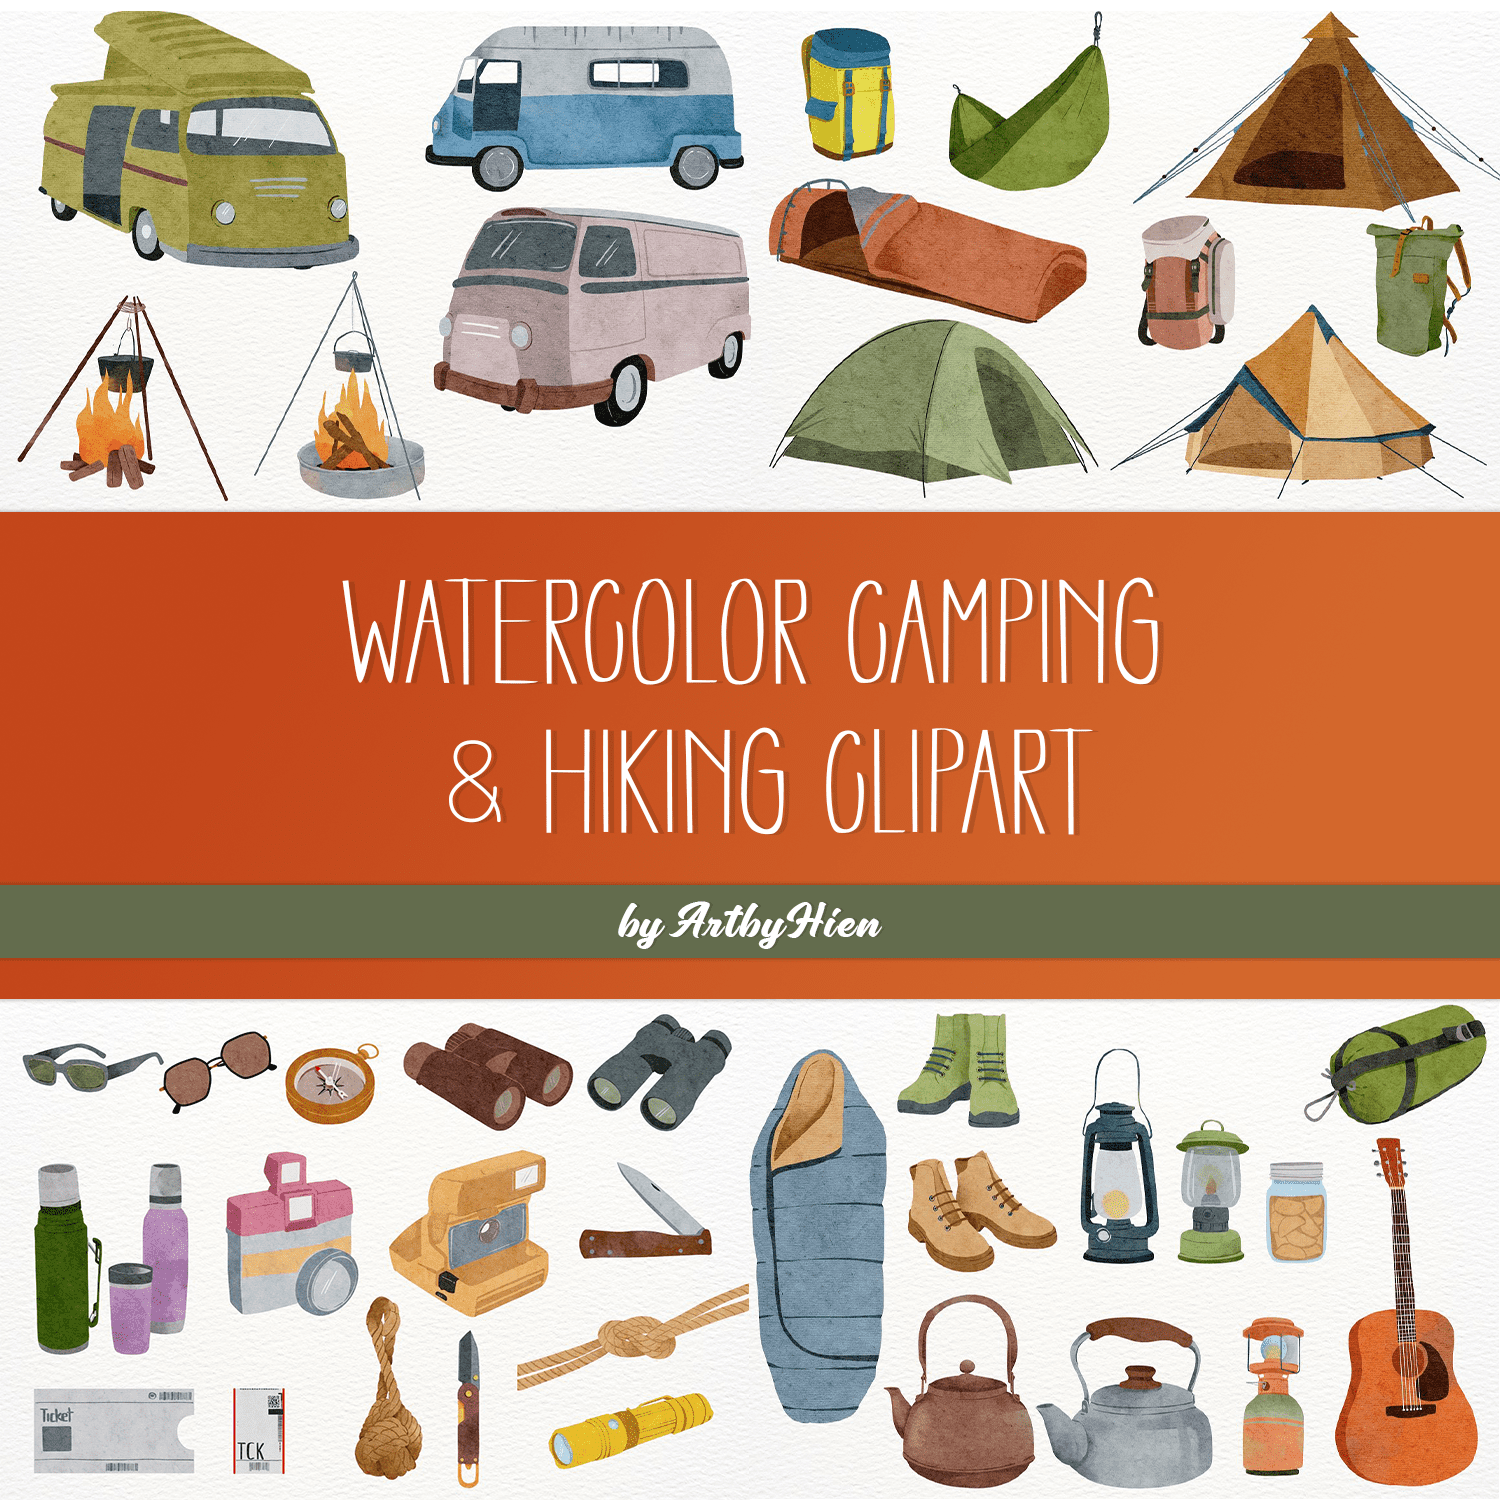 Watercolor Camping & Hiking Clipart created by ArtbyHien.